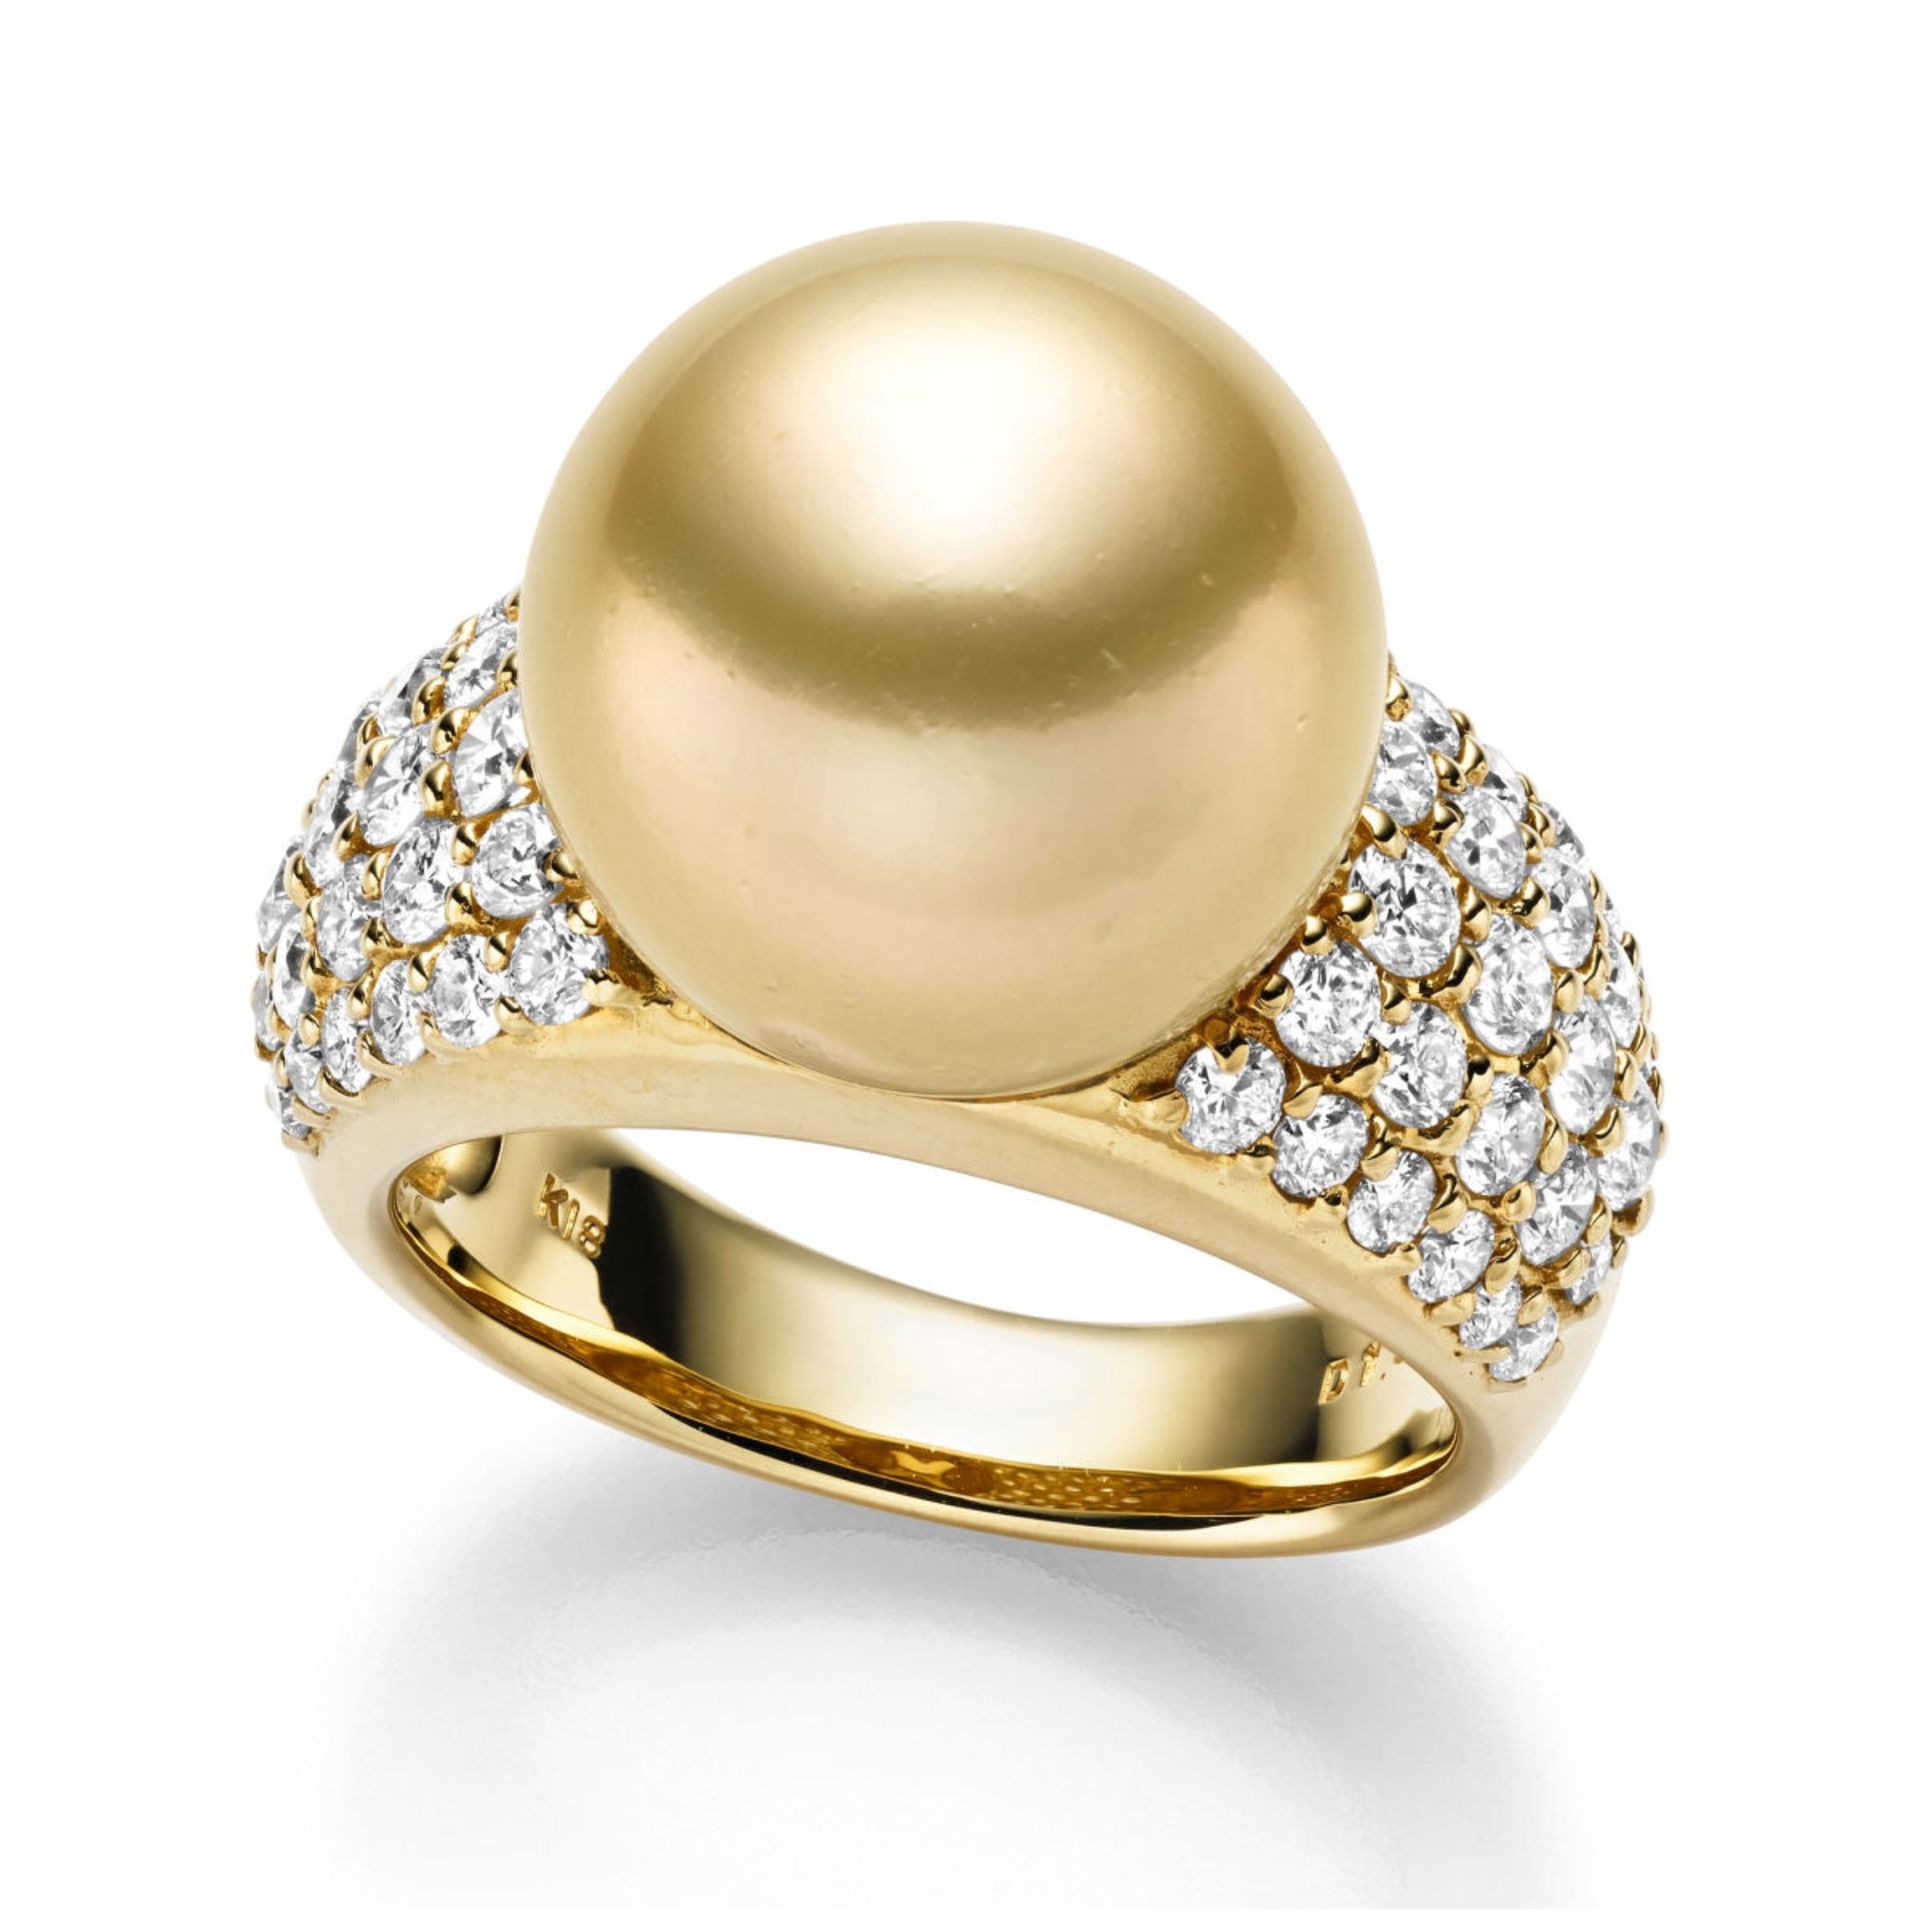 South Sea pearl ring with diamonds - Image 2 of 2